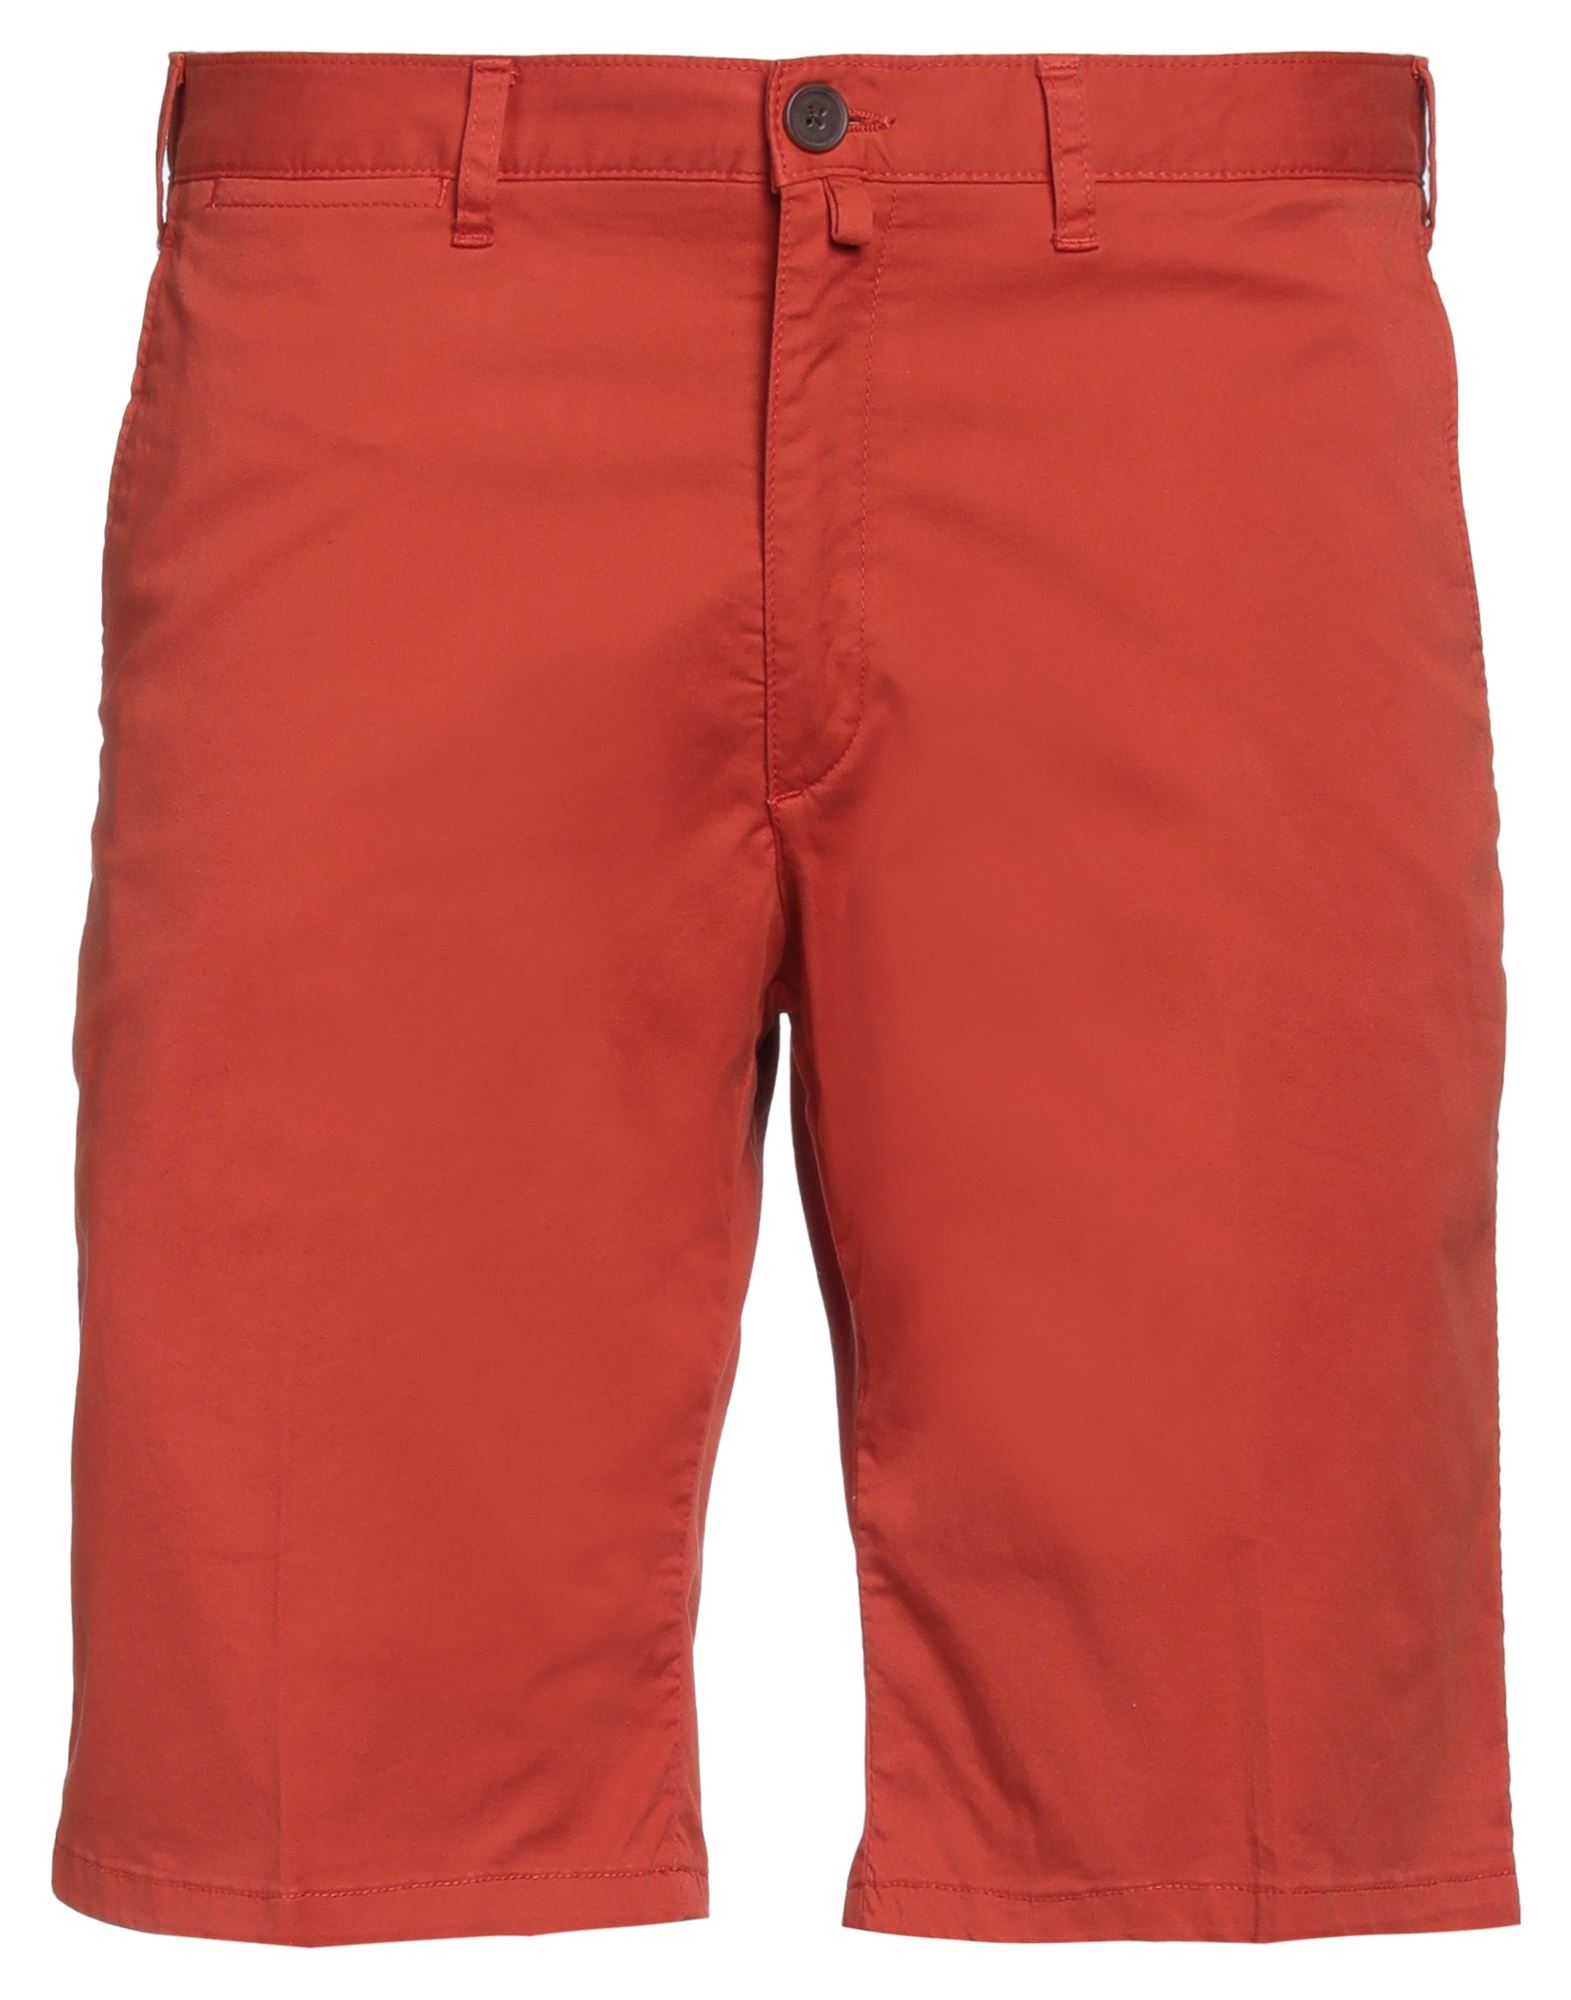 Barbour Man Shorts & Bermuda Shorts Rust Size 36 Cotton, Elastane In Red